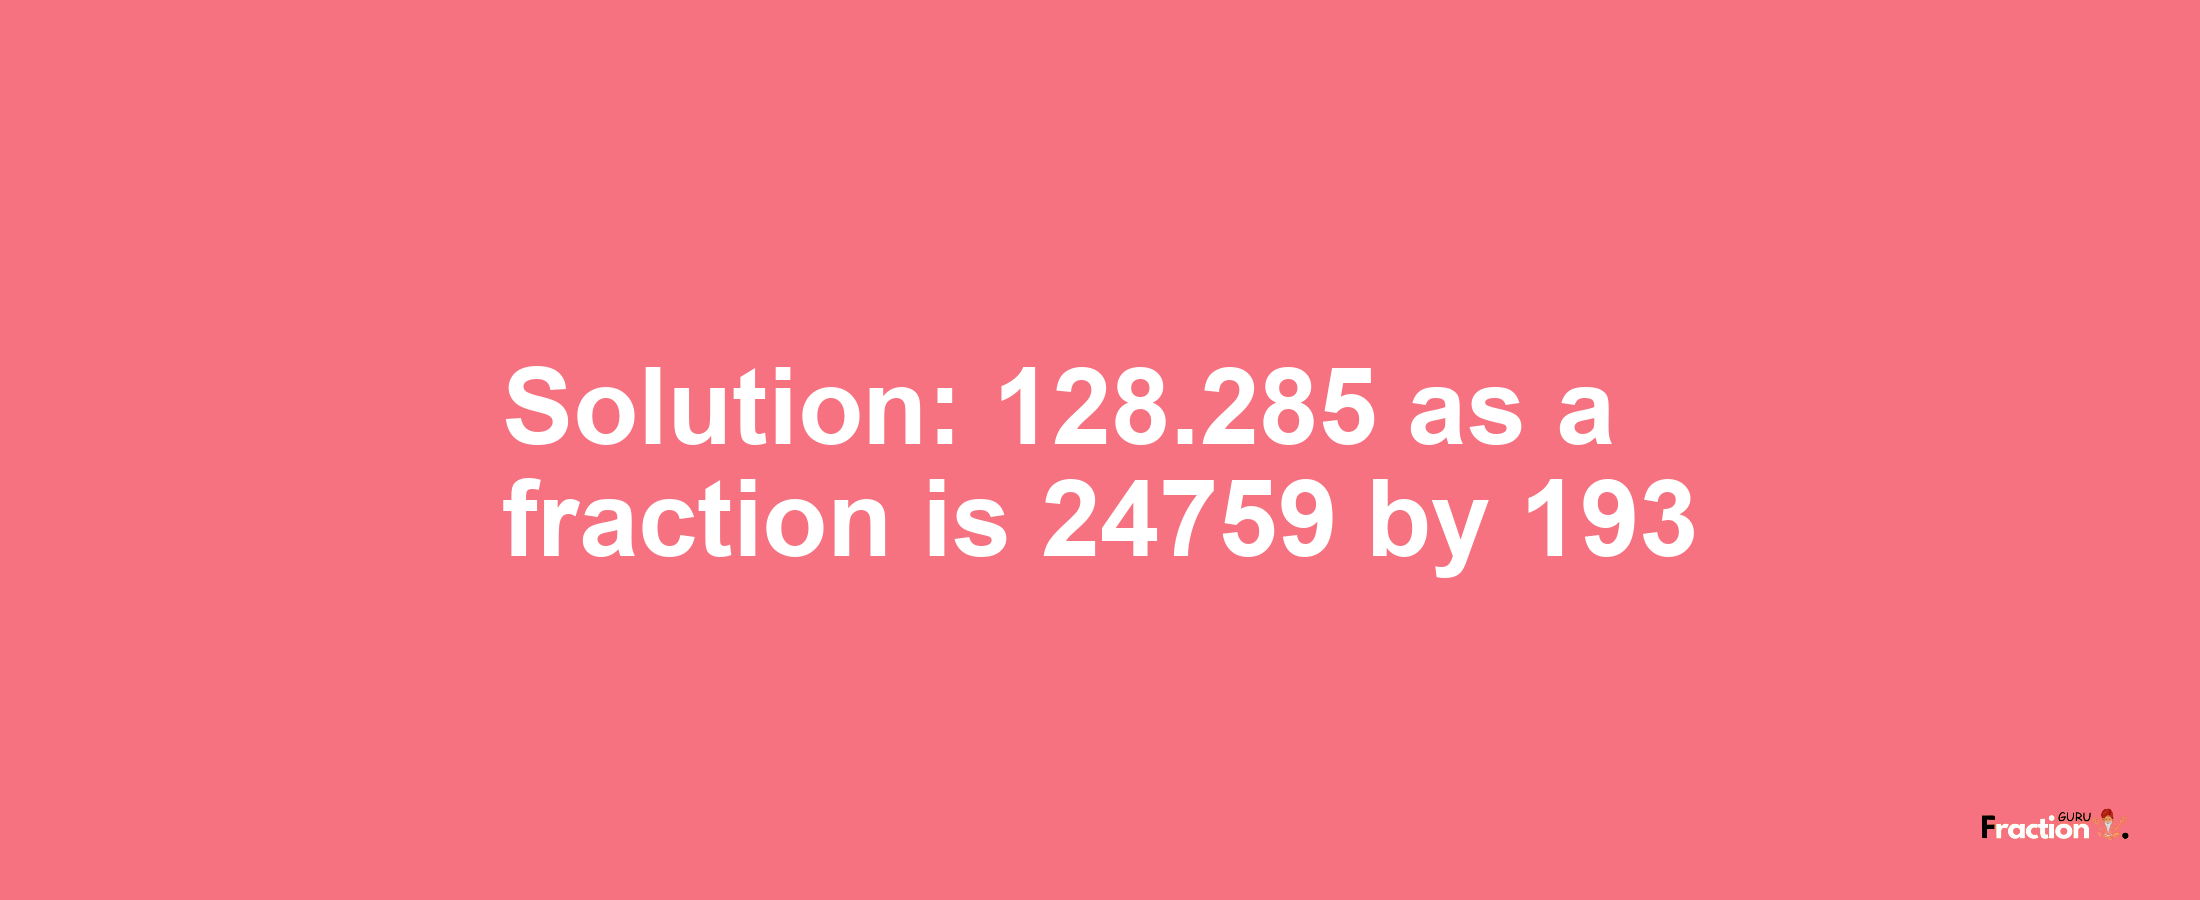 Solution:128.285 as a fraction is 24759/193